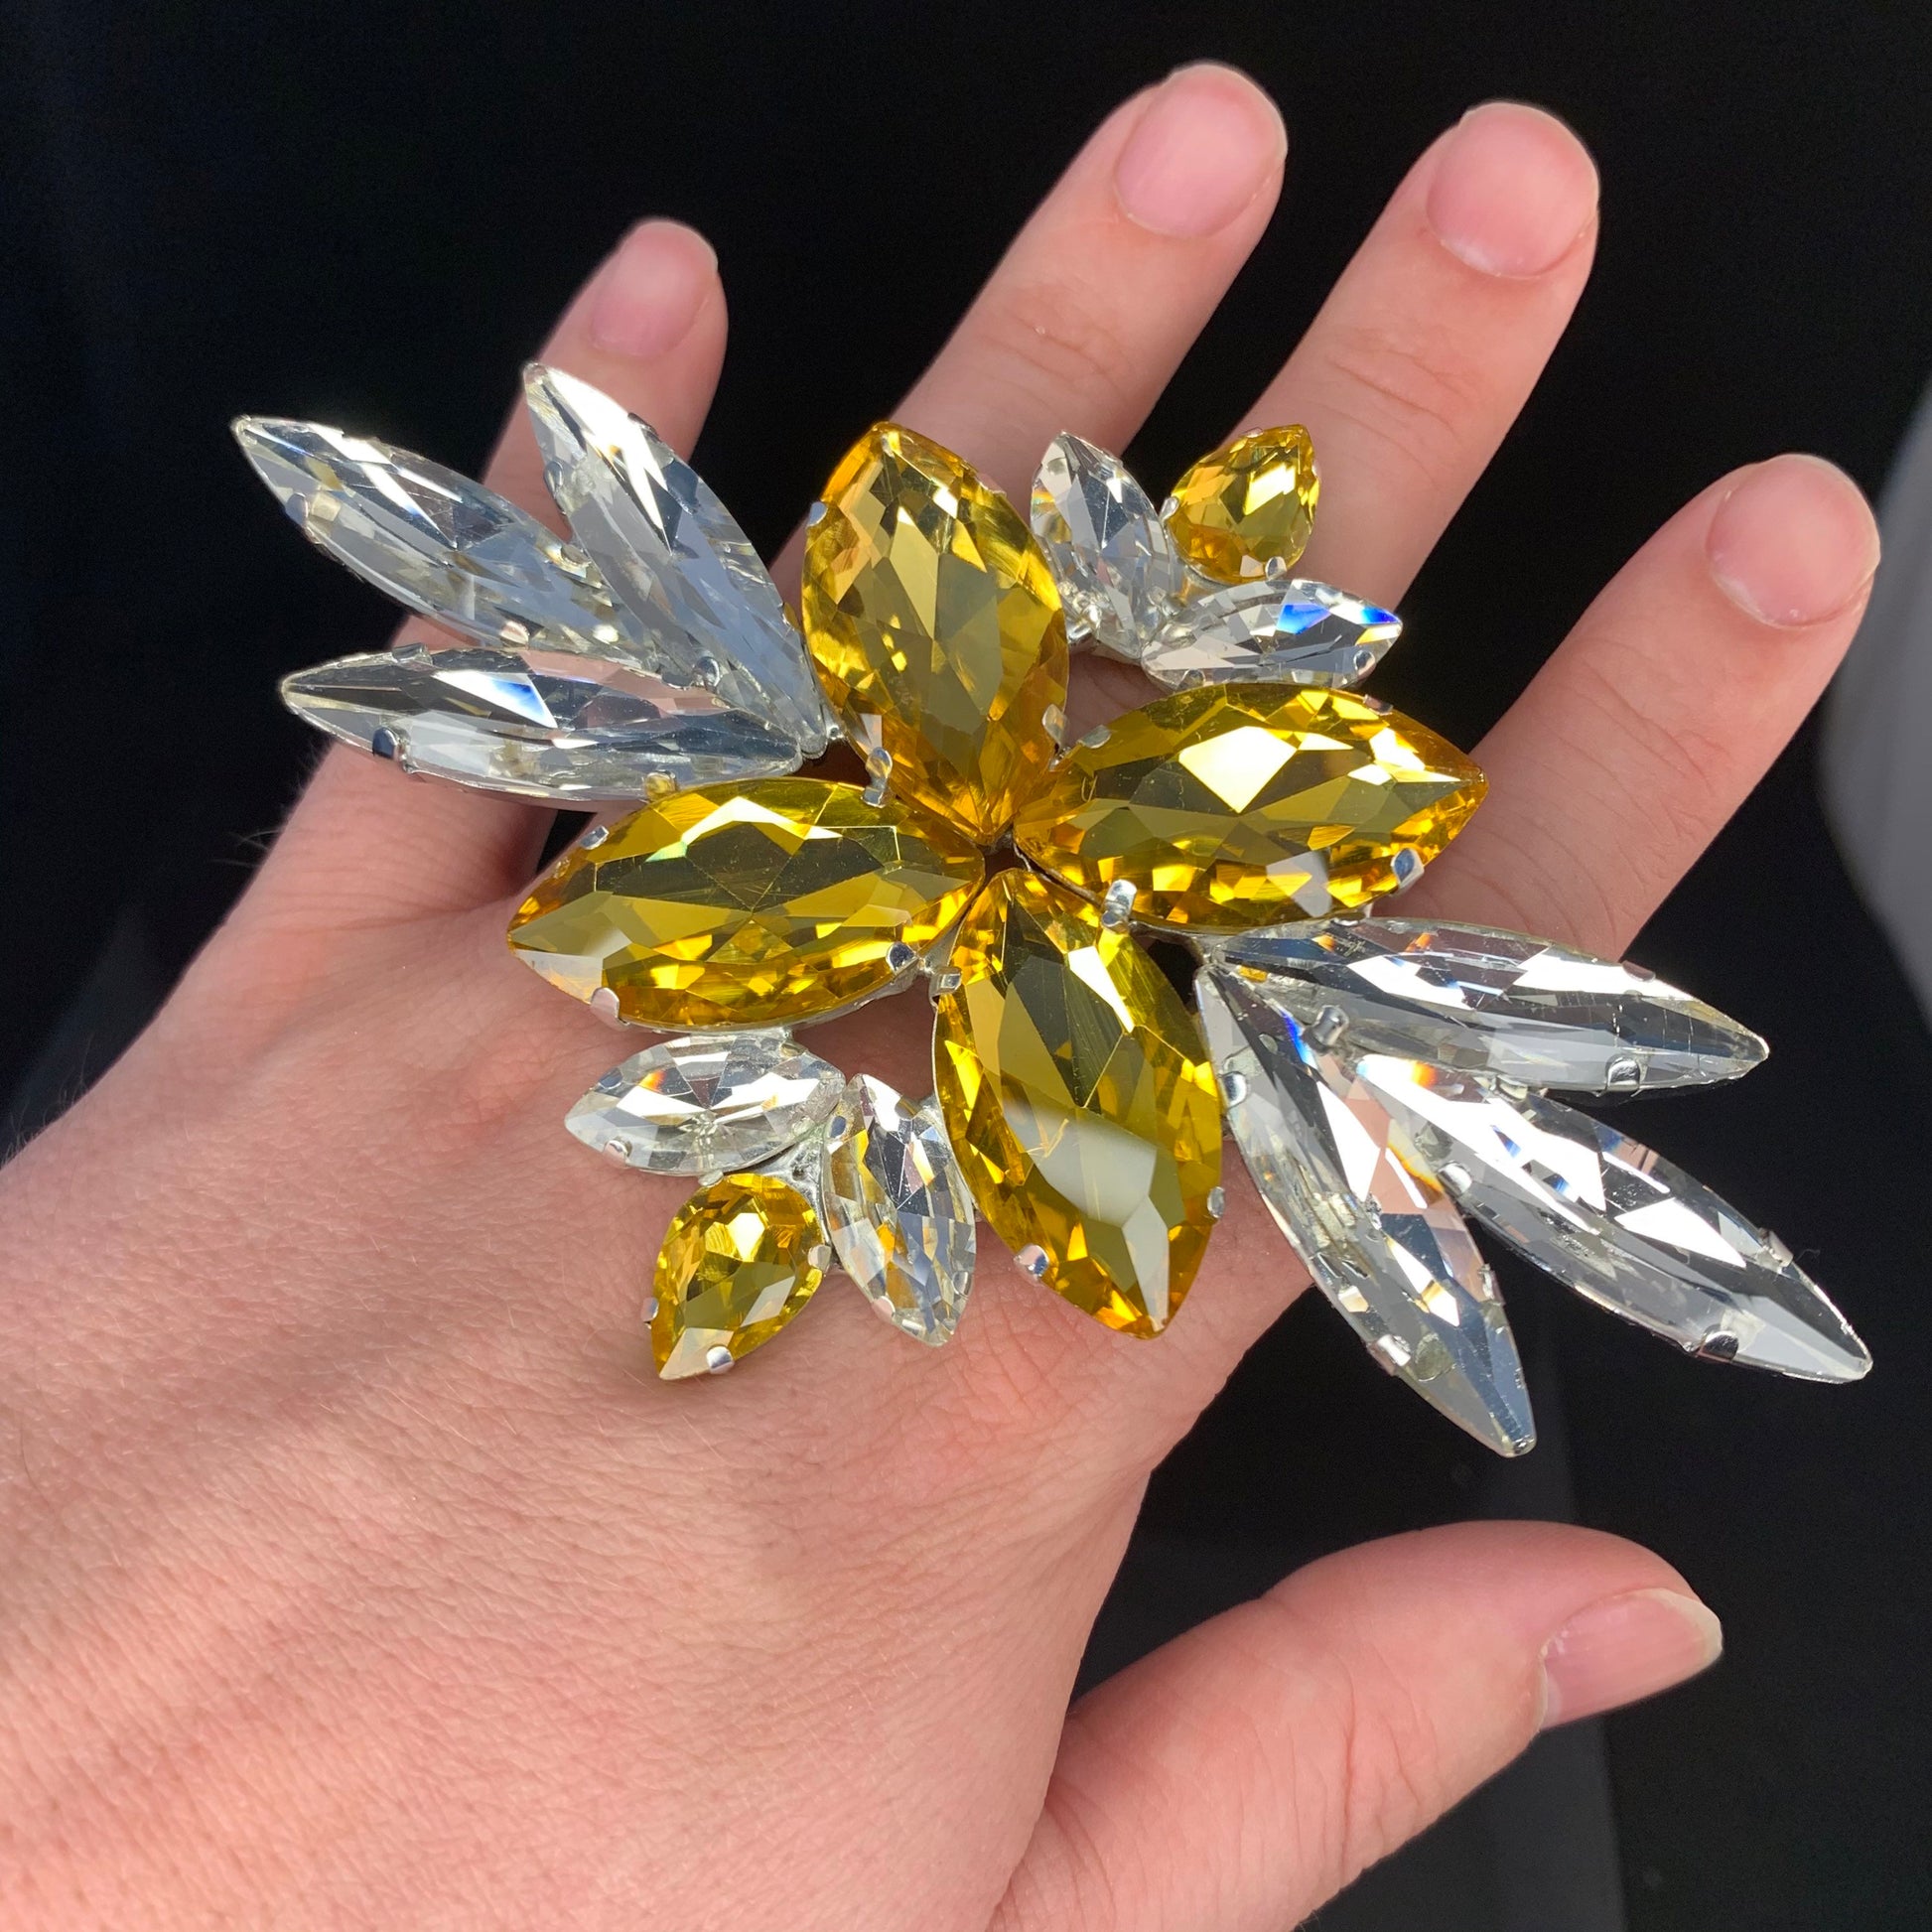 XL Elegant Statement Ring / large Cocktail Dress Ring / Adjustable back / Gift / Drag Queen Ring /Costume Jewellery